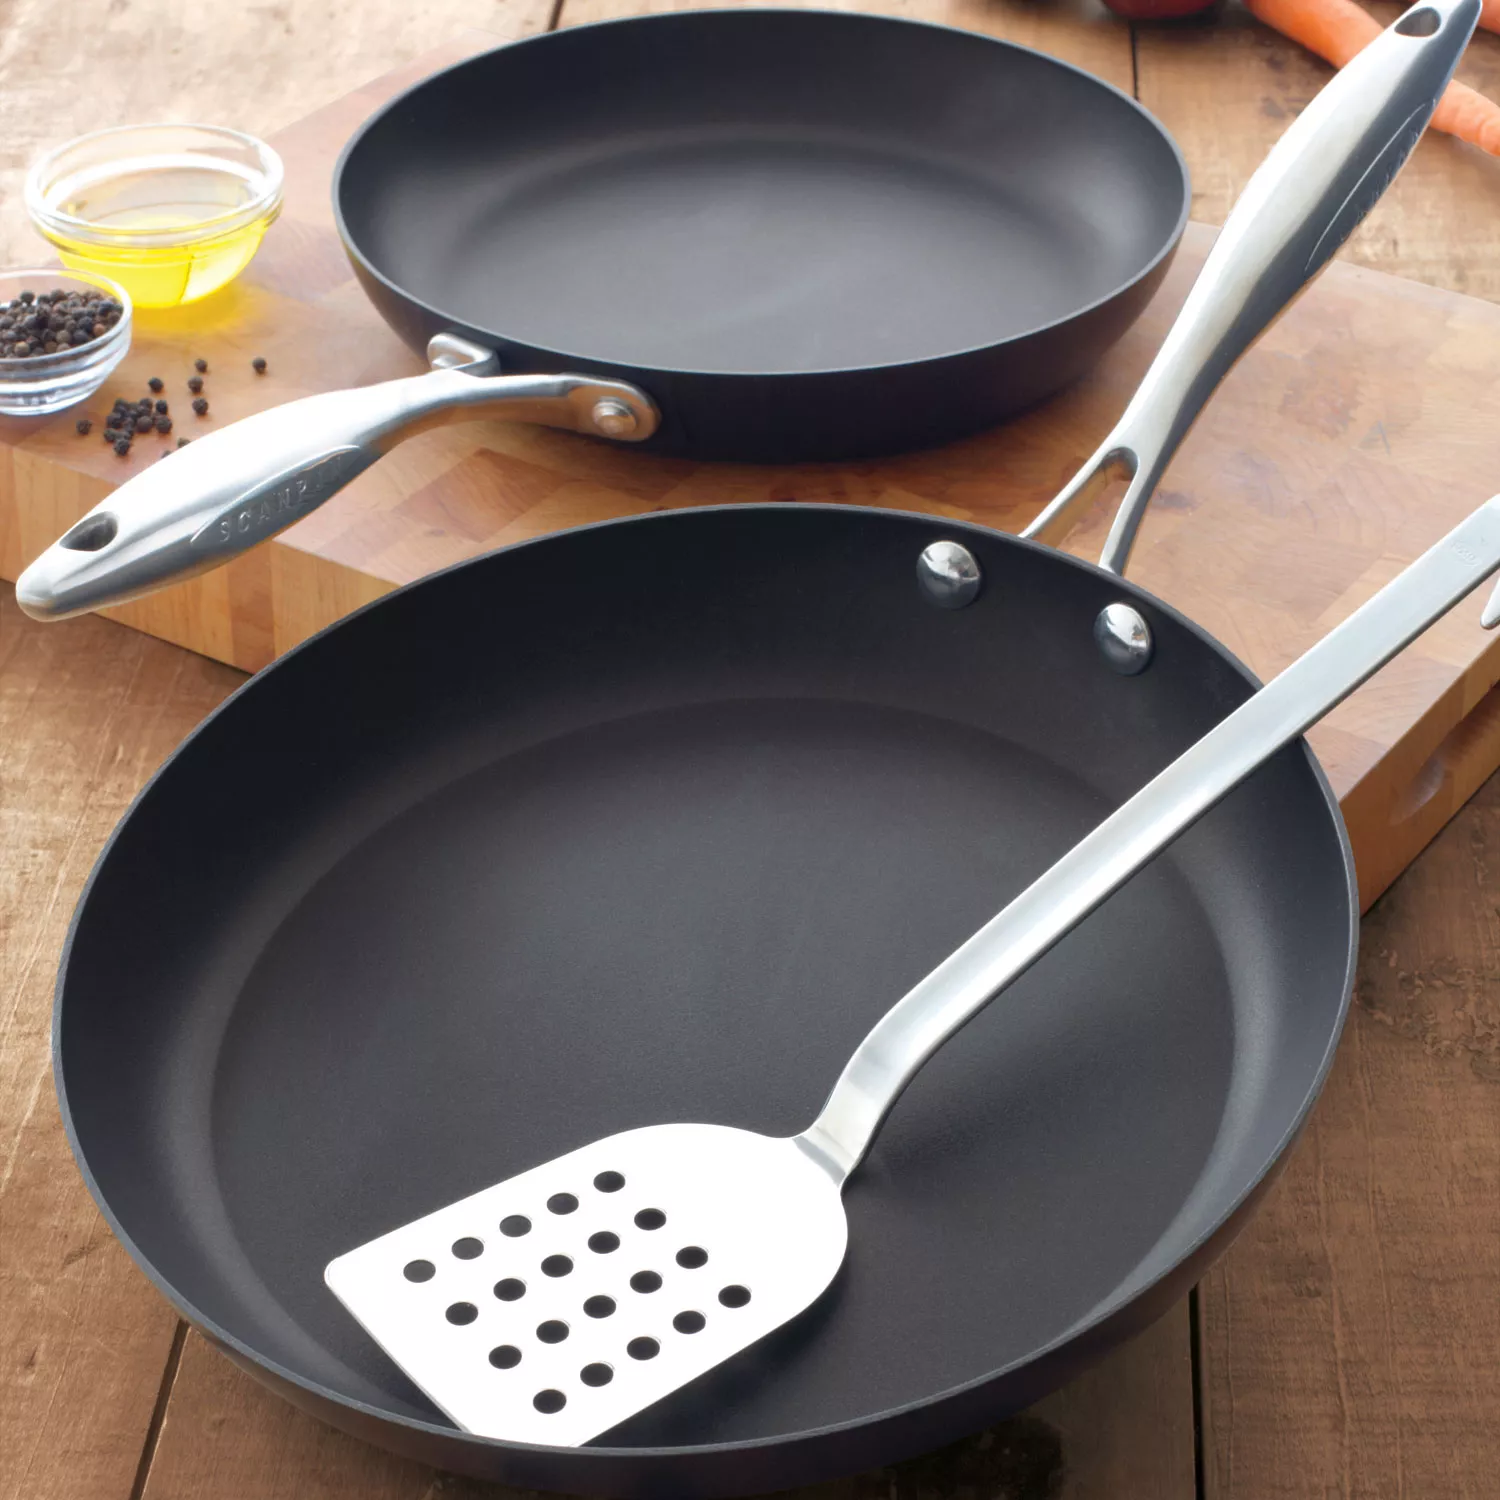 Scanpan PRO IQ 2-Piece Fry Pan Set 9.5 in. and 11 in.